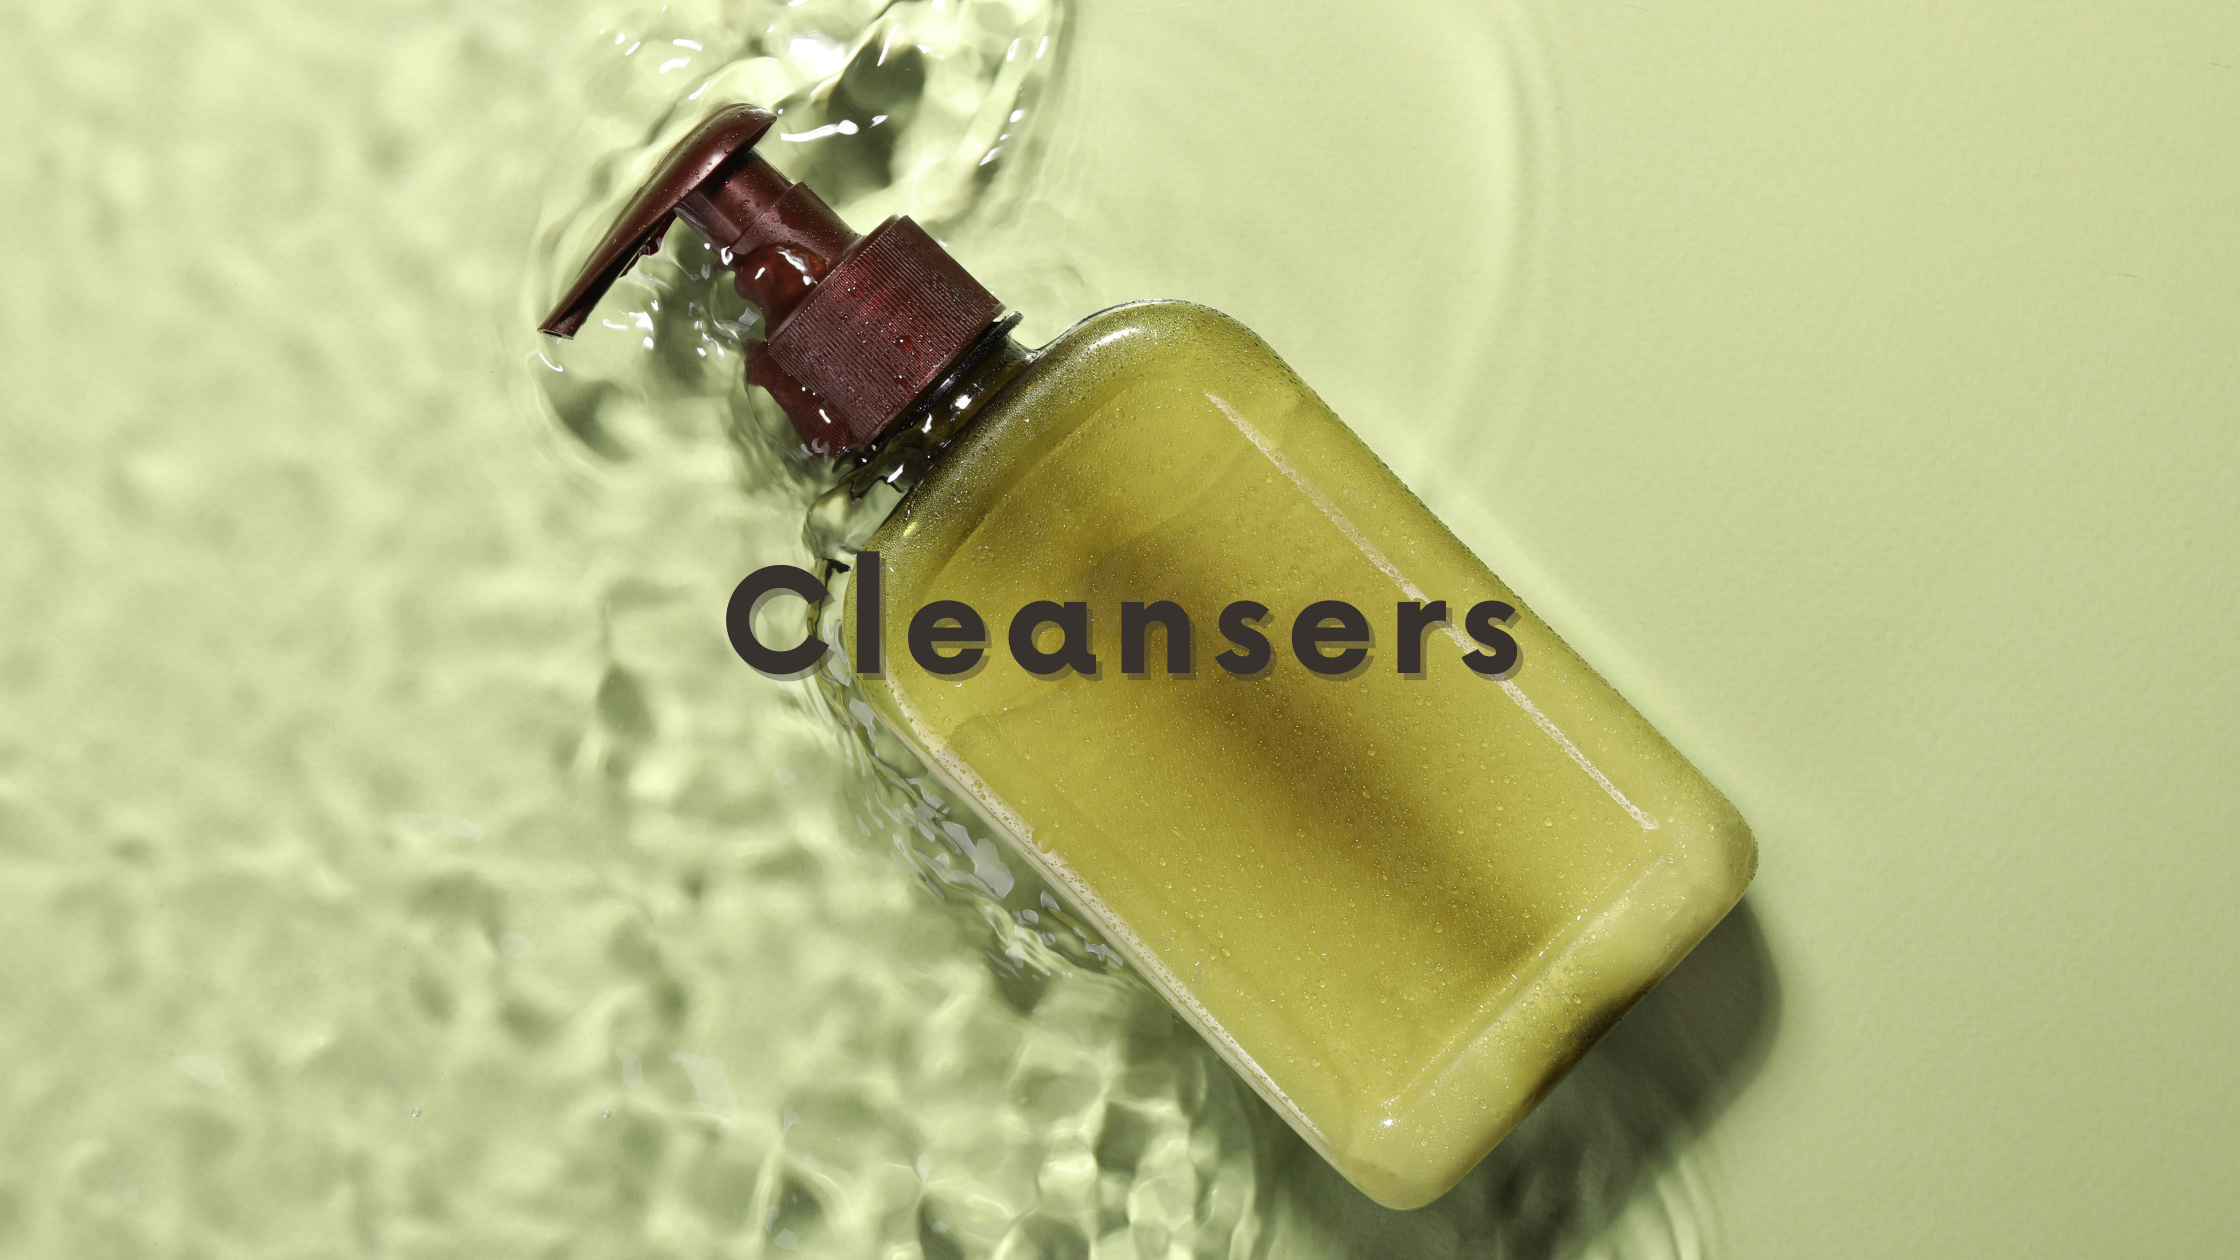 DSC Cleansers Blog Graphic with text cleansers in black centered over green bottle of facial cleanser on a green background with water